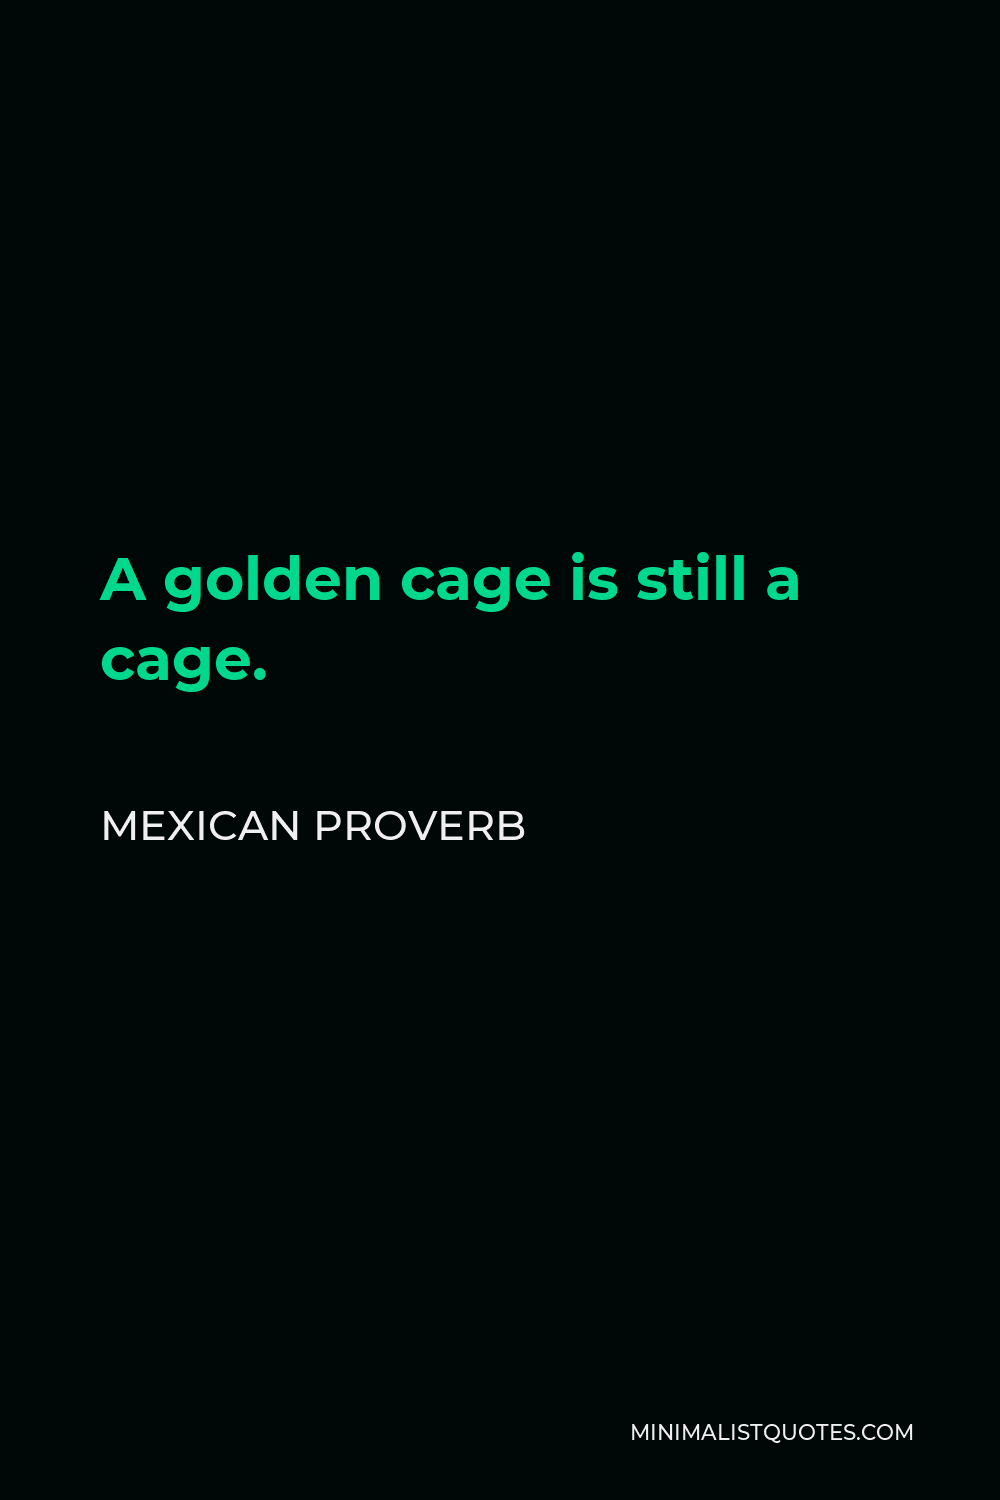 Mexican Proverb Quote - A golden cage is still a cage.